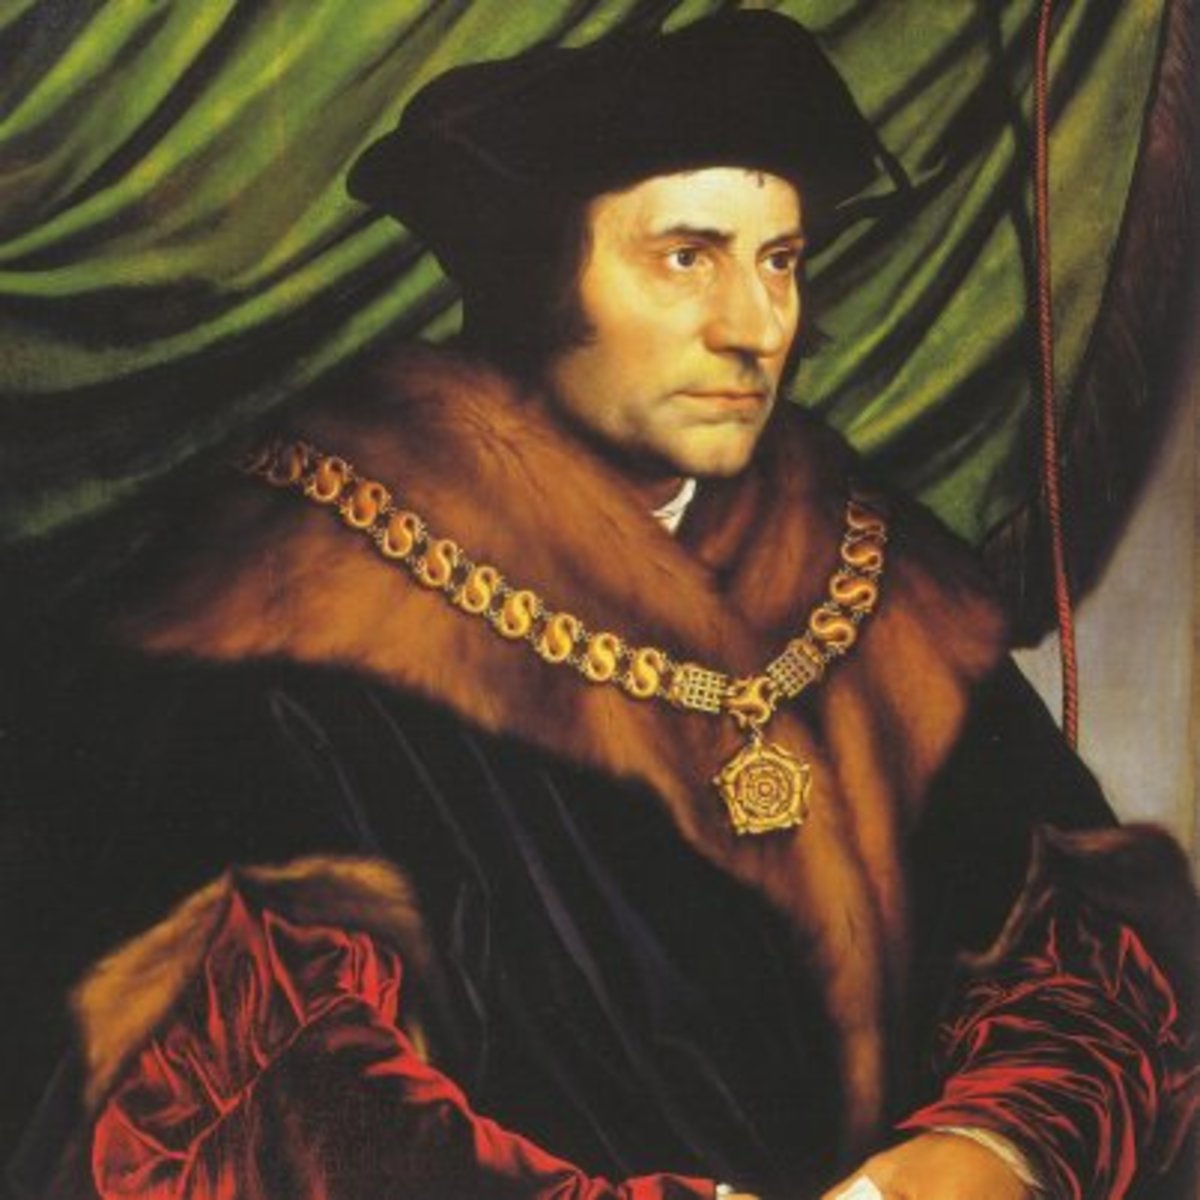 As well as generating anti-Protestant sentiment, Syon was also accused of harbouring the King's enemies. Frequent visitors to the monastery included Bishop of London, John Fisher, and Lord Chancellor Thomas More. Both were very vocal in their opposition to the divorce. (6)